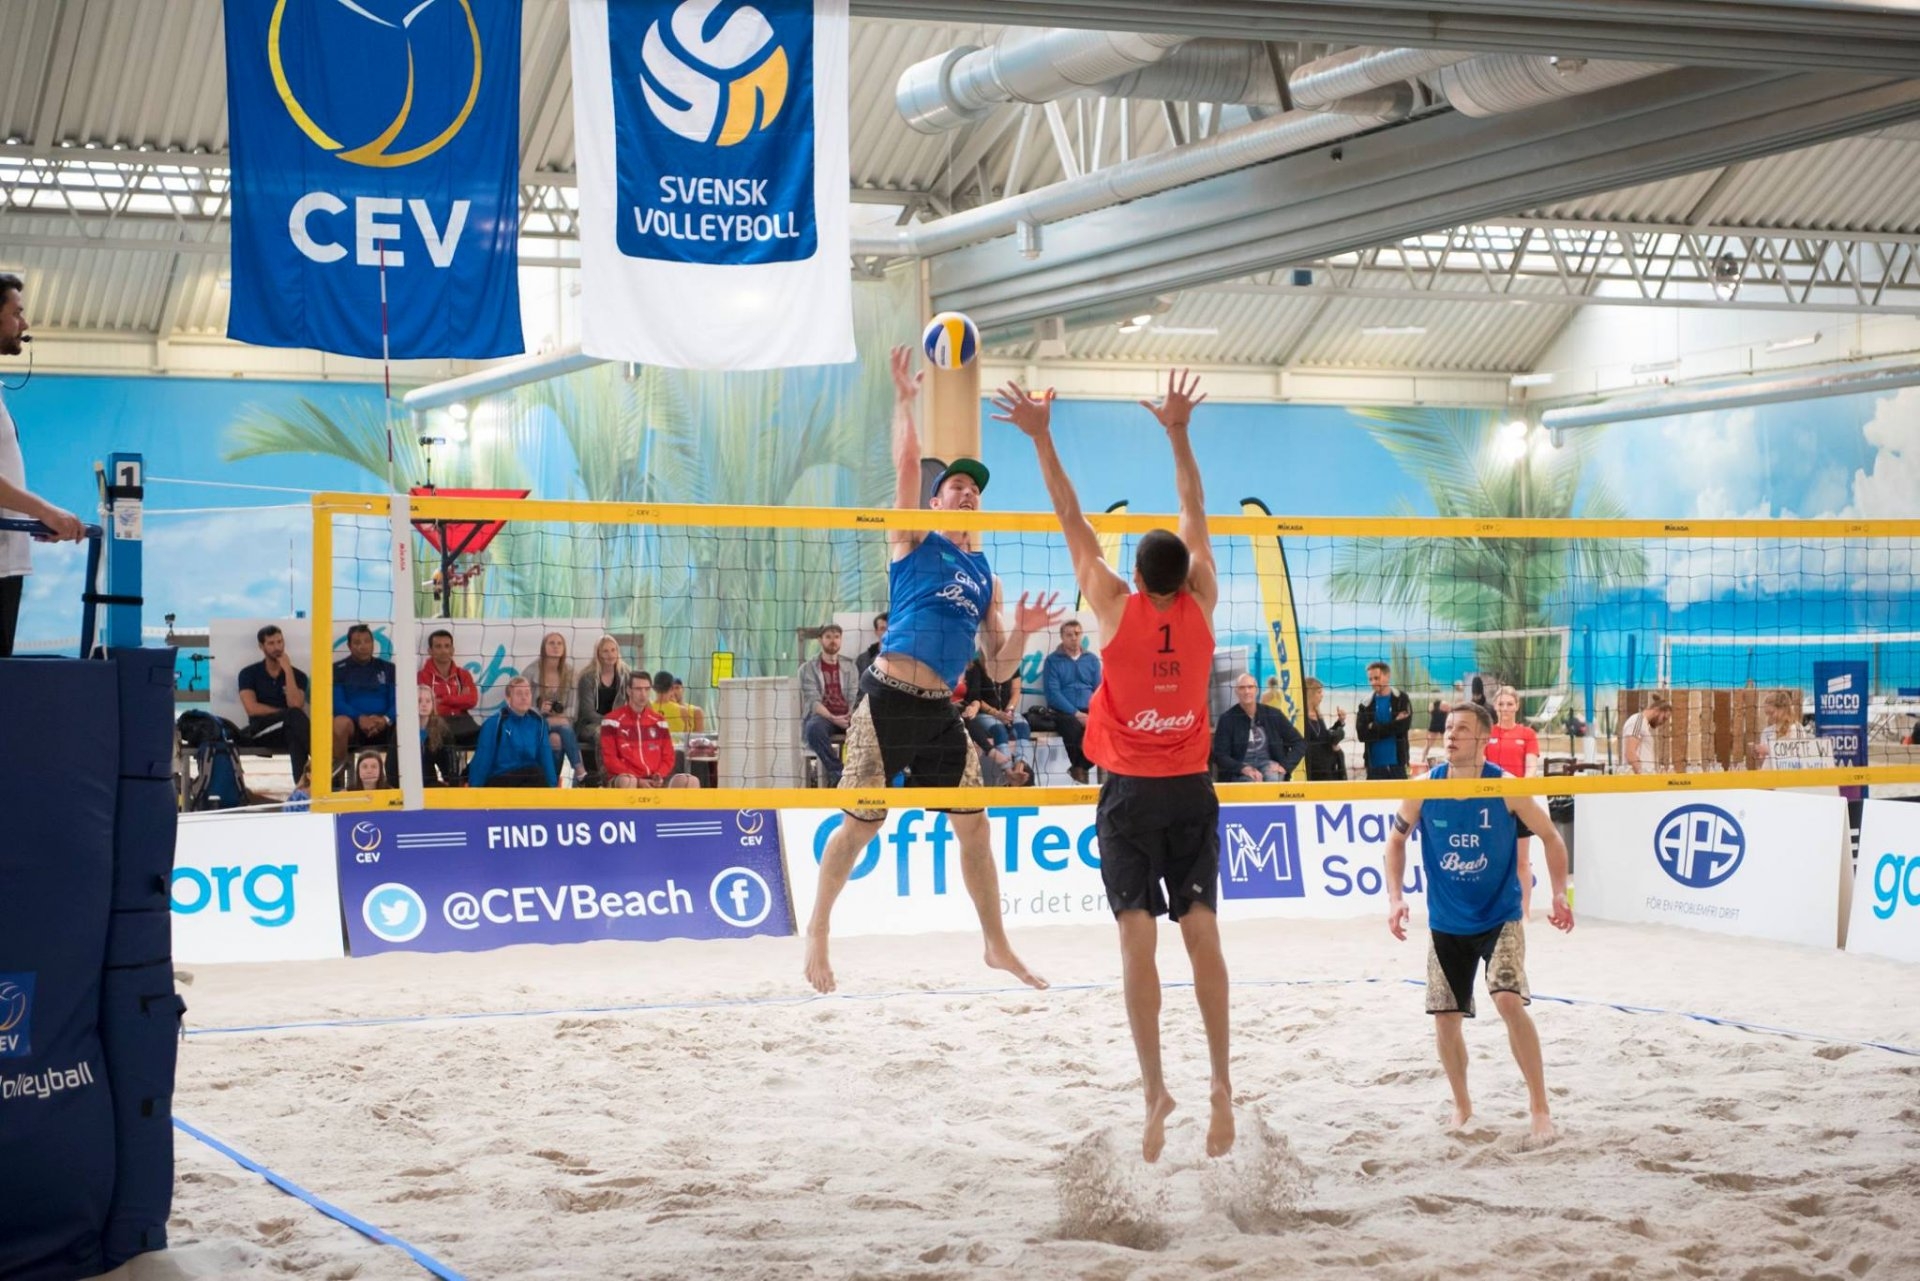 The Beach Center in Goteborg hosts the CEV Satellite tournament this weekend (Photocredit: CEV)